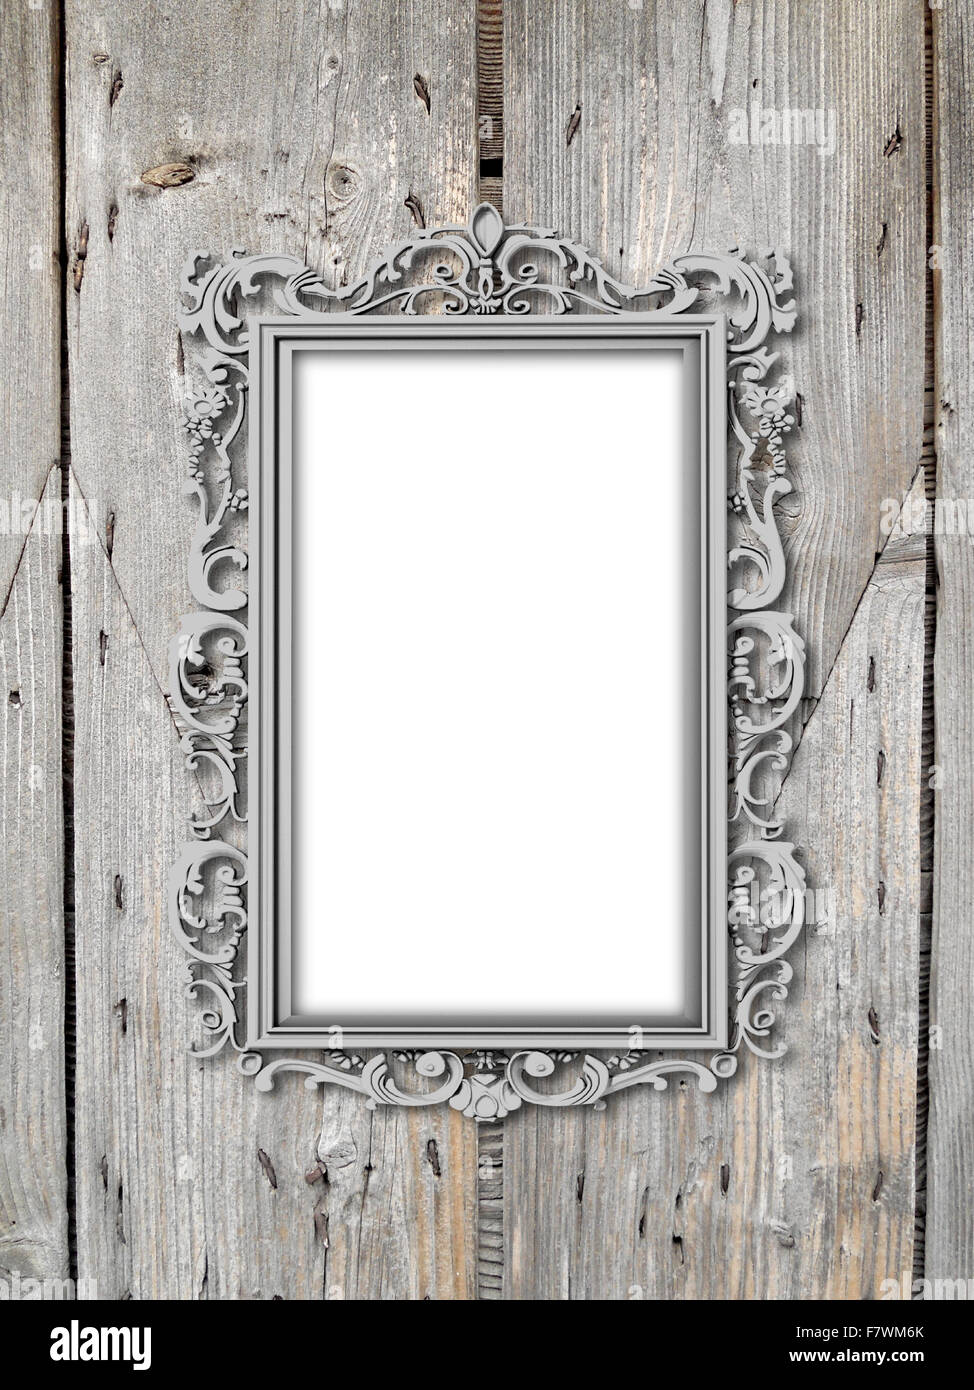 Single silver plated baroque frame on wooden boards background Stock Photo